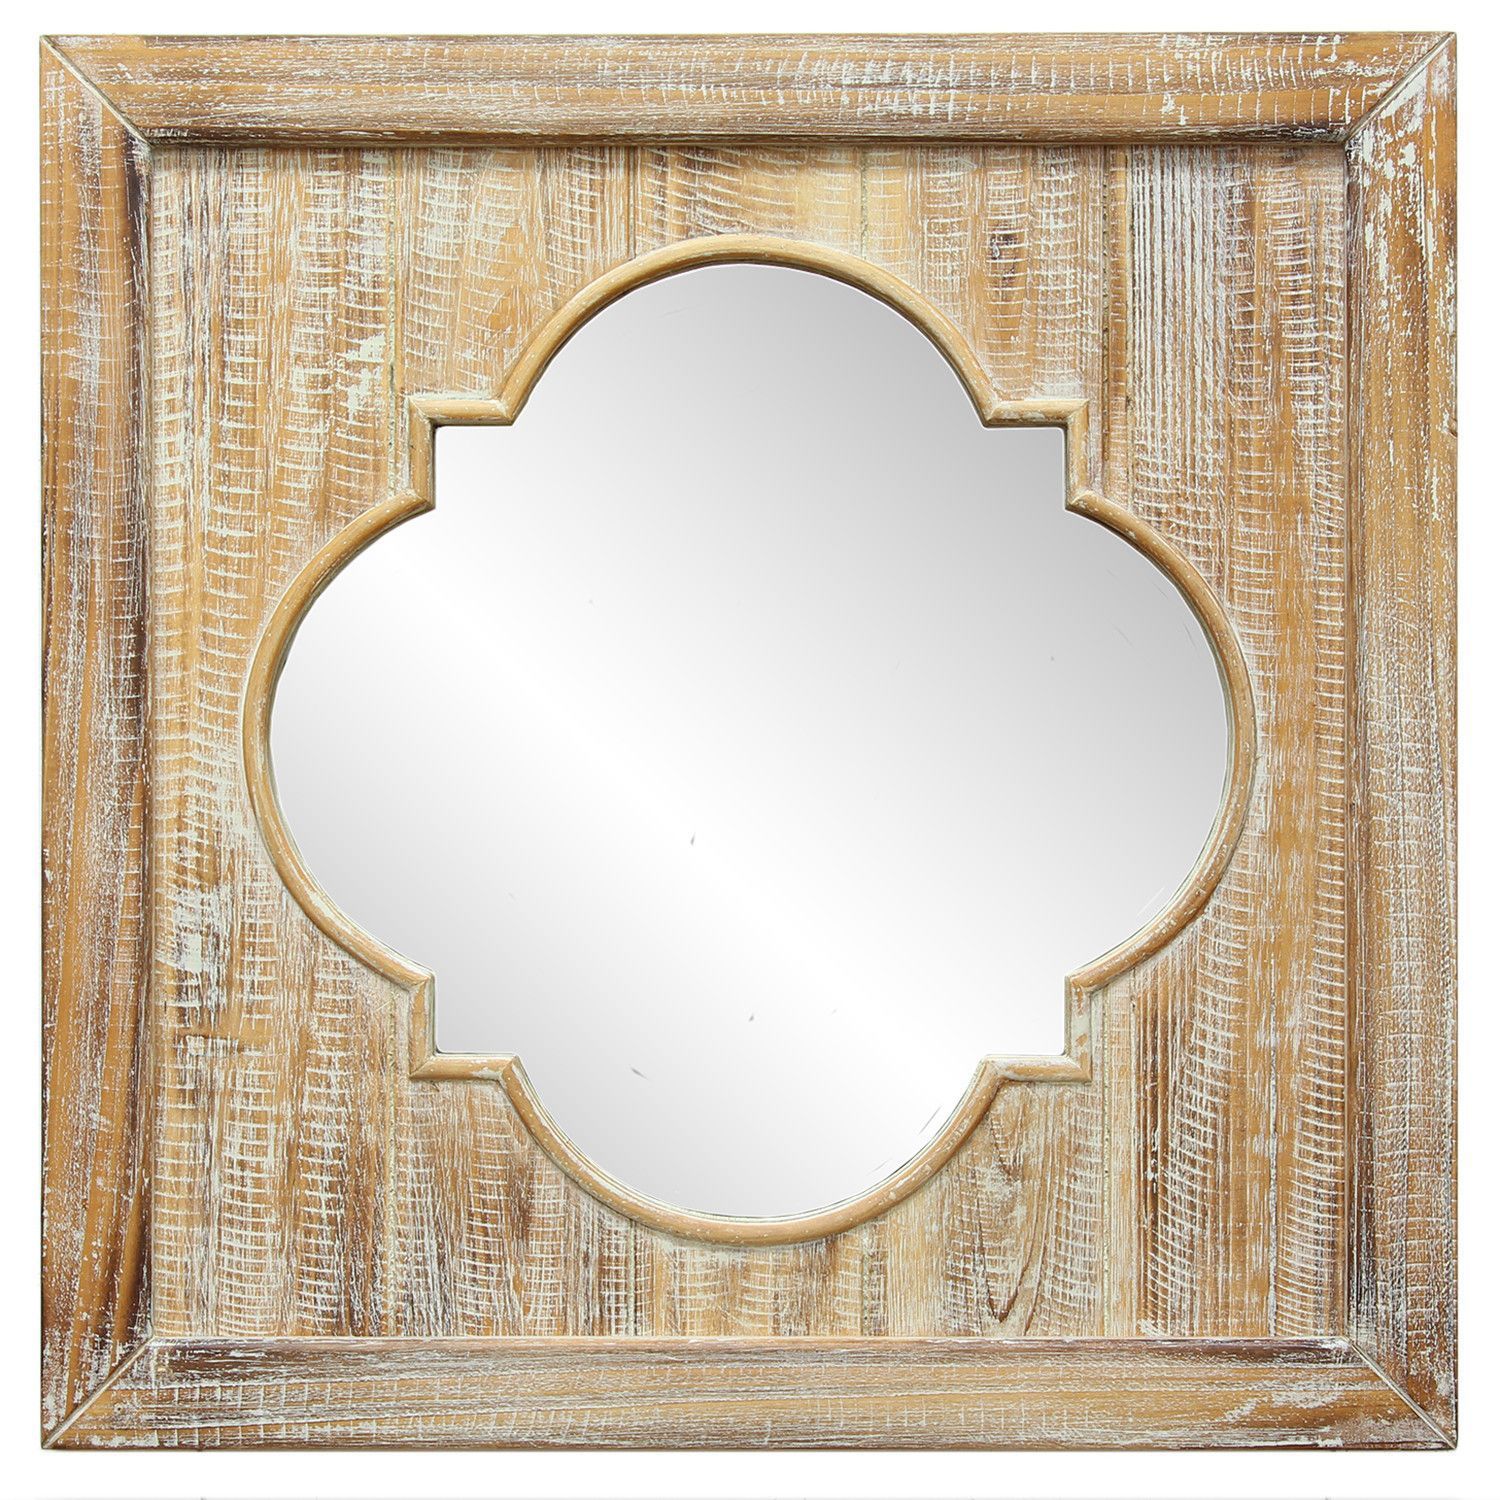 Stratton Home Decor Distressed Wood Quatrefoil Wall Mirror | Wood Wall With Regard To Quatrefoil Wall Mirrors (View 7 of 15)